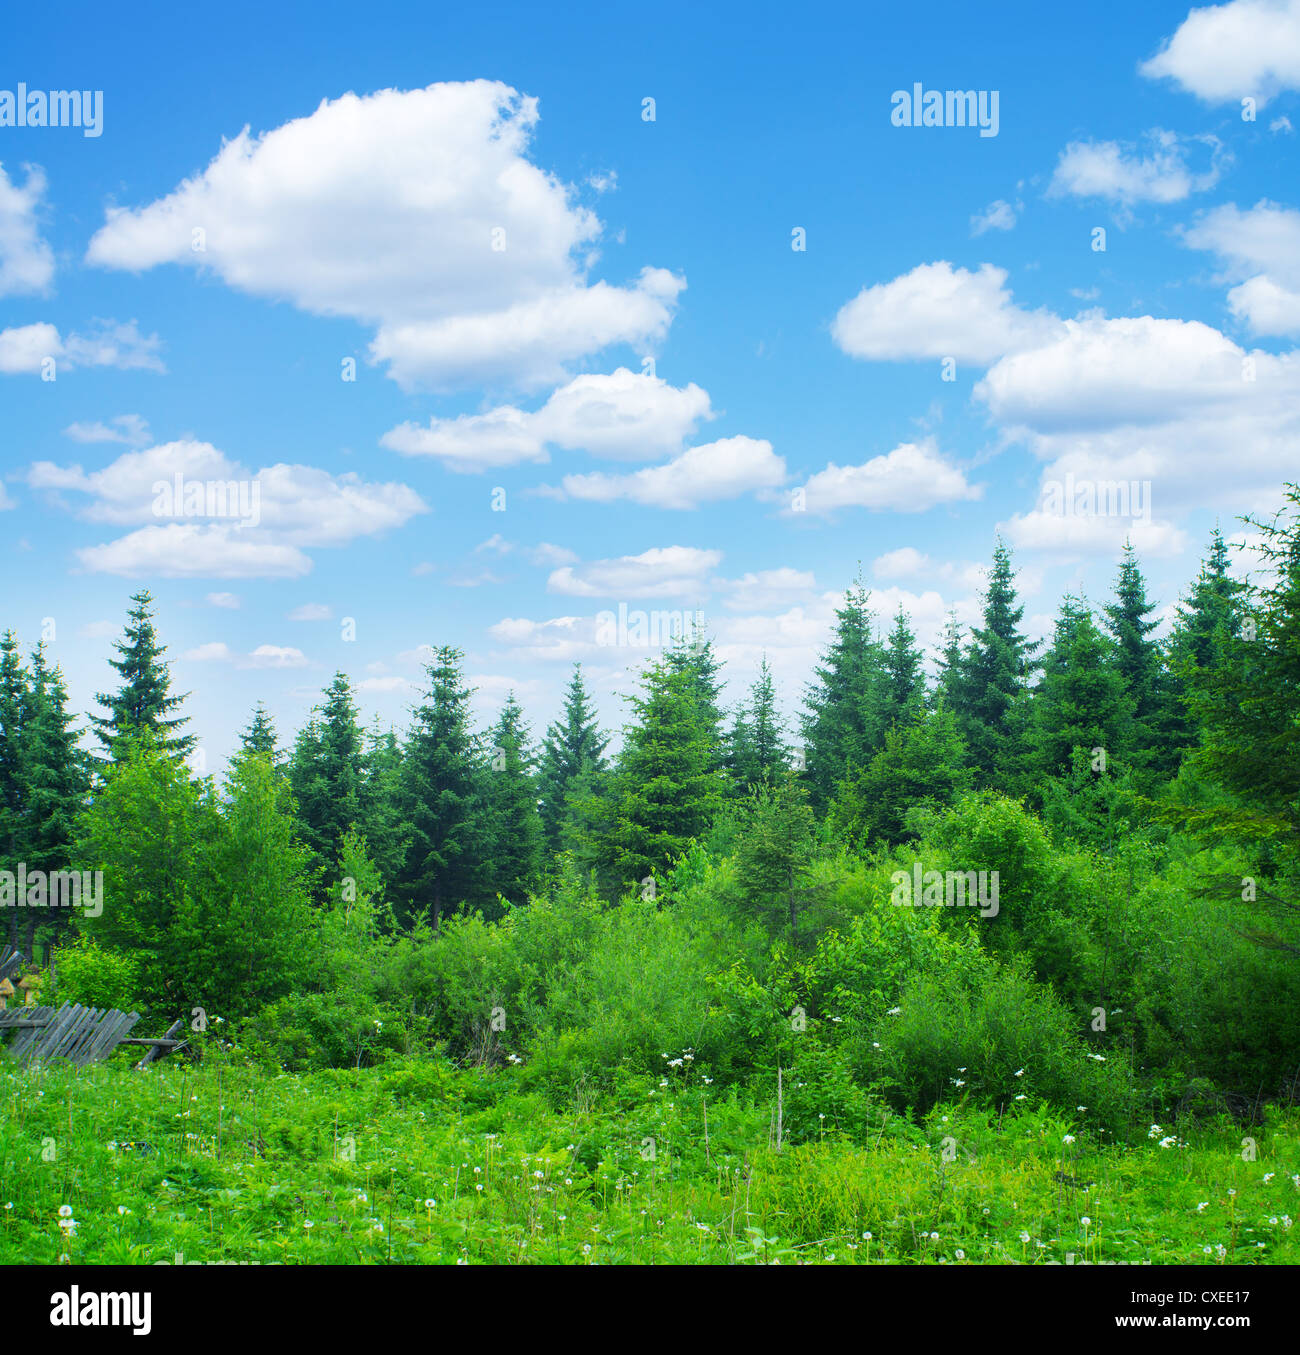 Summer forest under the blue sky and white clouds Stock Photo